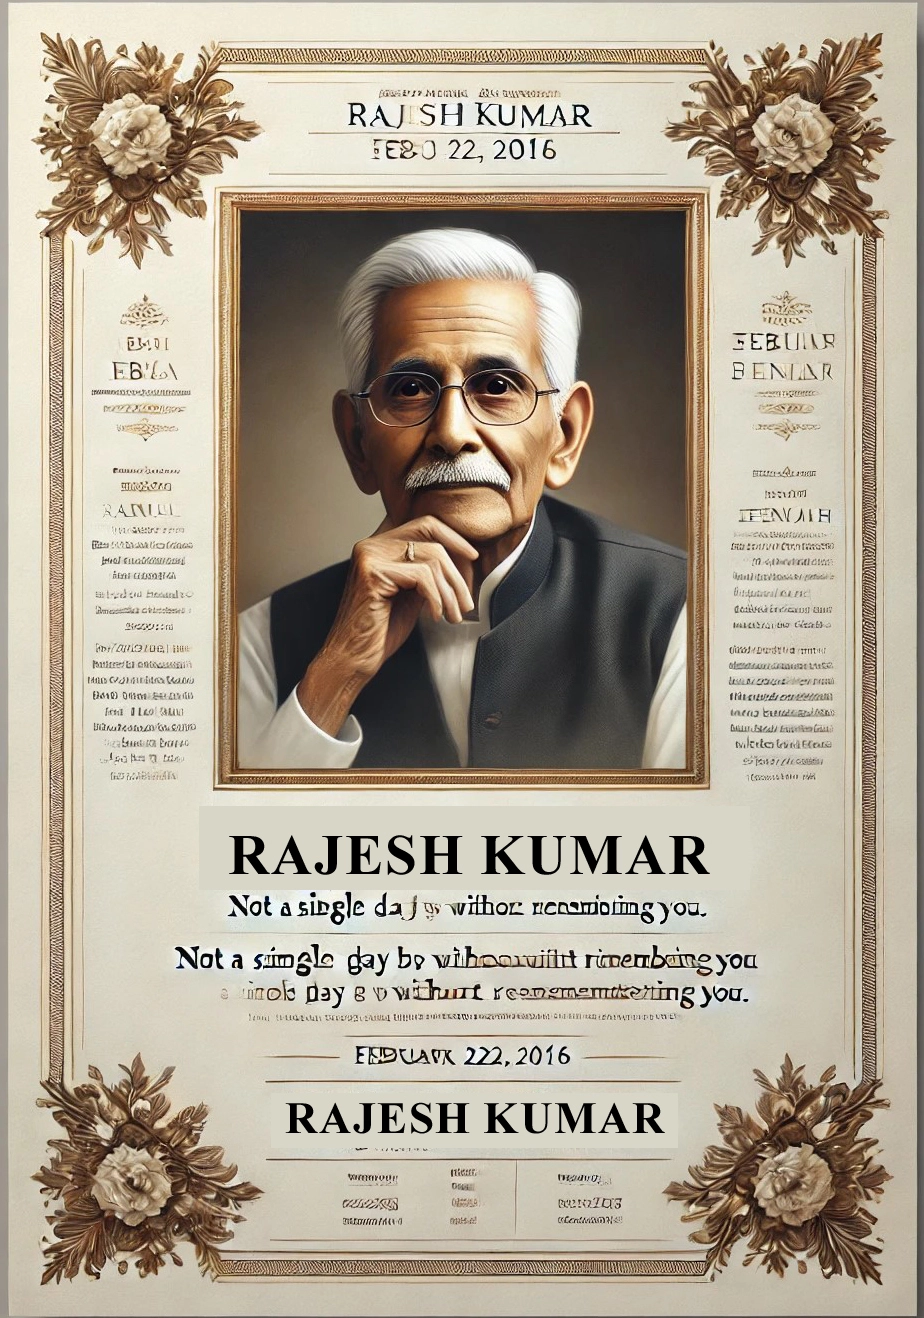 Remembrance ads in Times of India newspaper